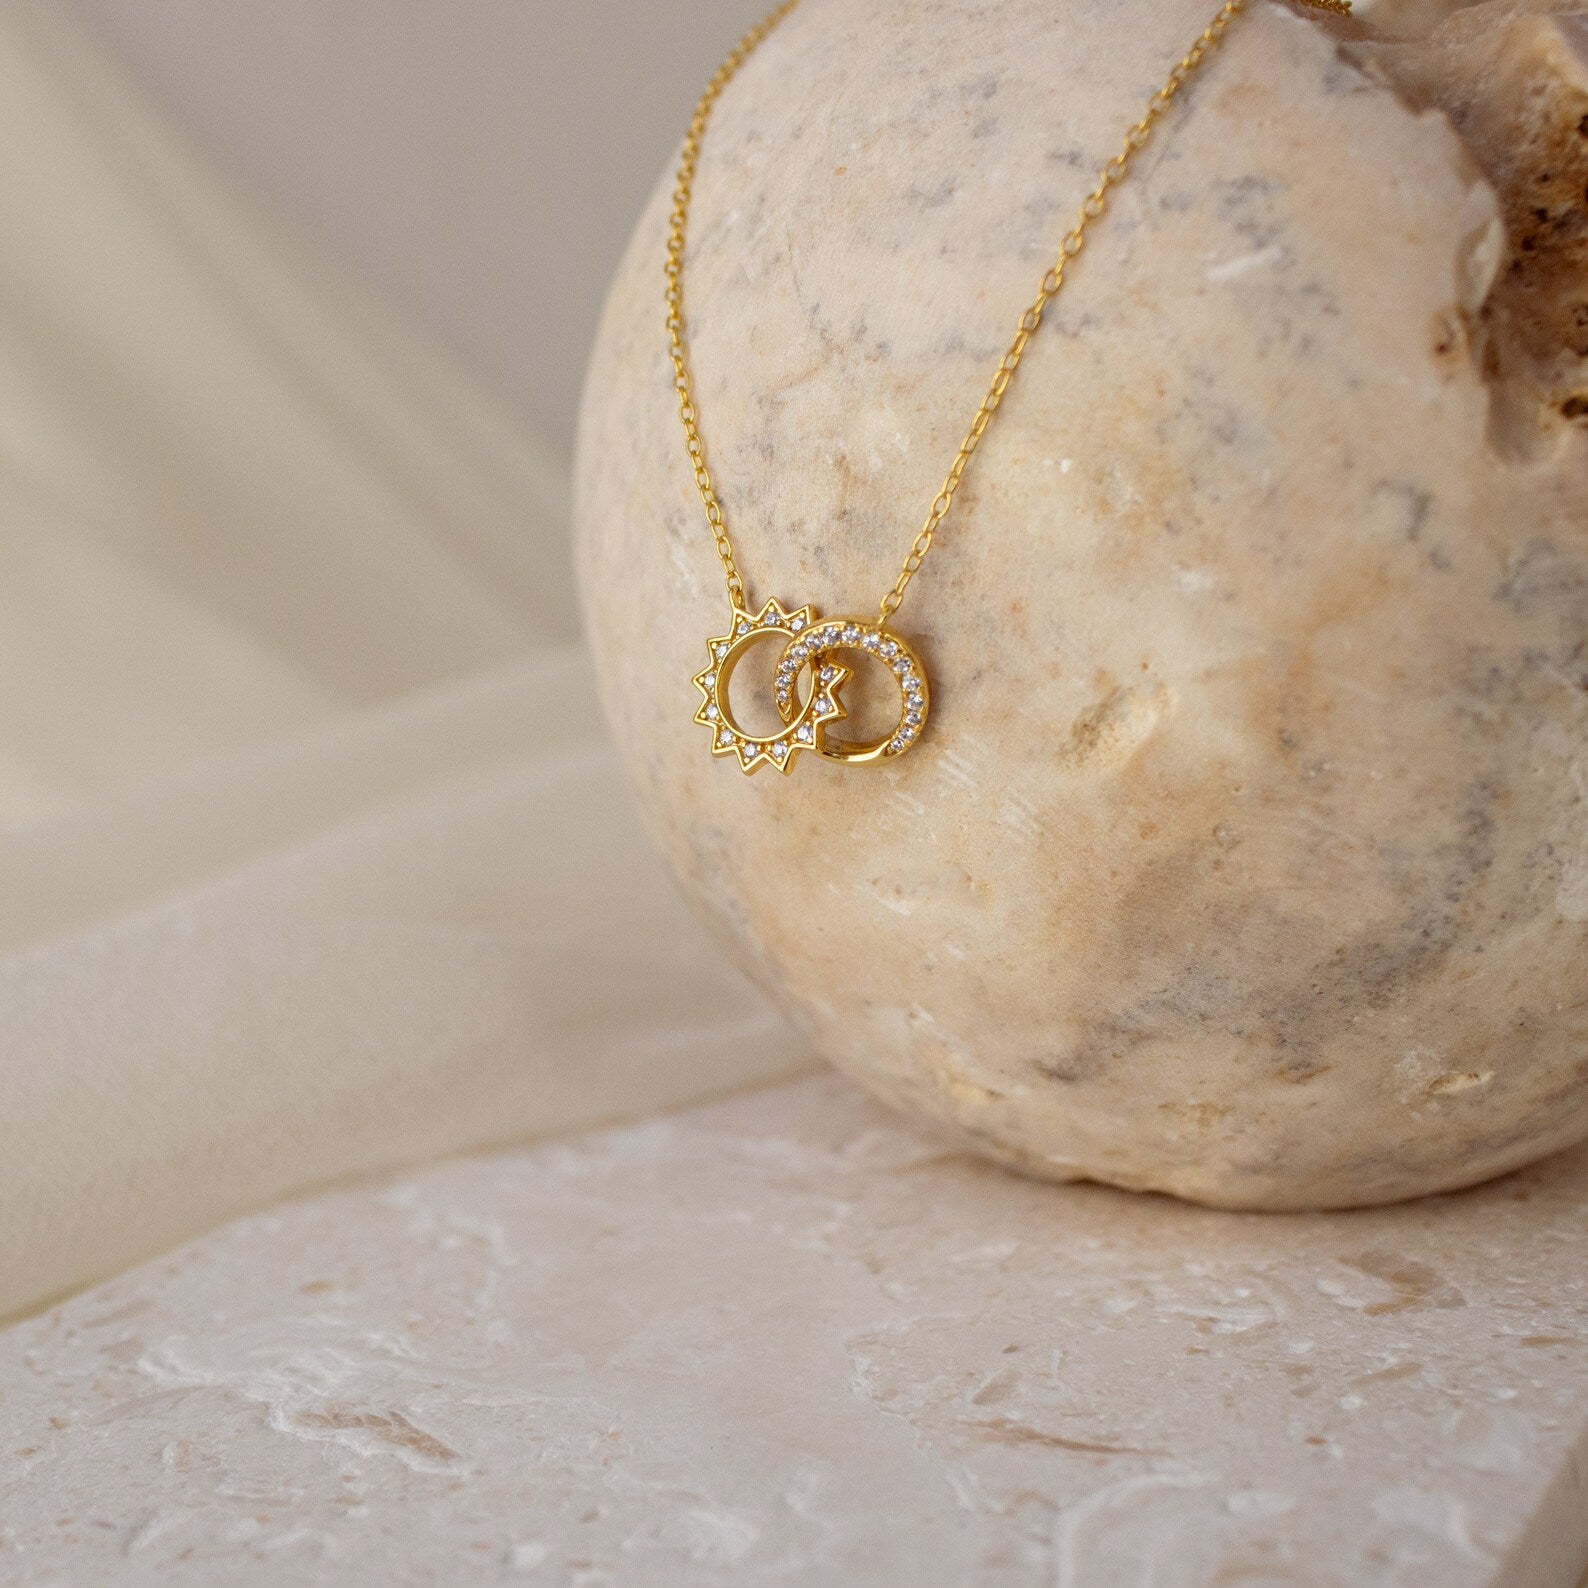 Sun and Moon Necklace, Gold Sun Moon Necklace, Celestial Necklace, Moon  Necklace, Gold Sun Necklace, Friendship Necklace, Valentines Gift - Etsy |  Friendship necklaces, Moon pendant necklace, Moon goddess necklace